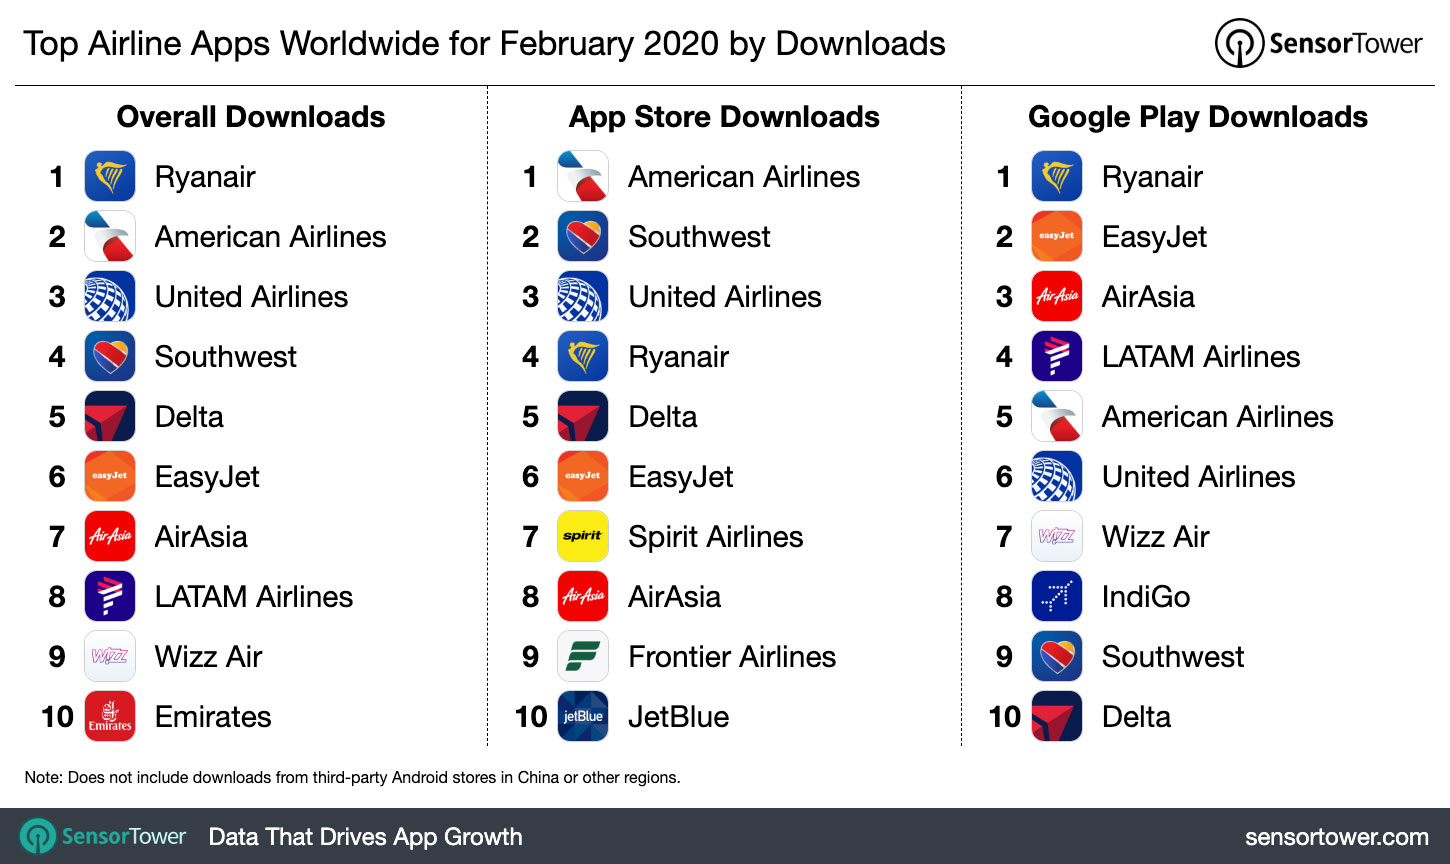 Top Airline Apps Worldwide for February 2020 by Downloads